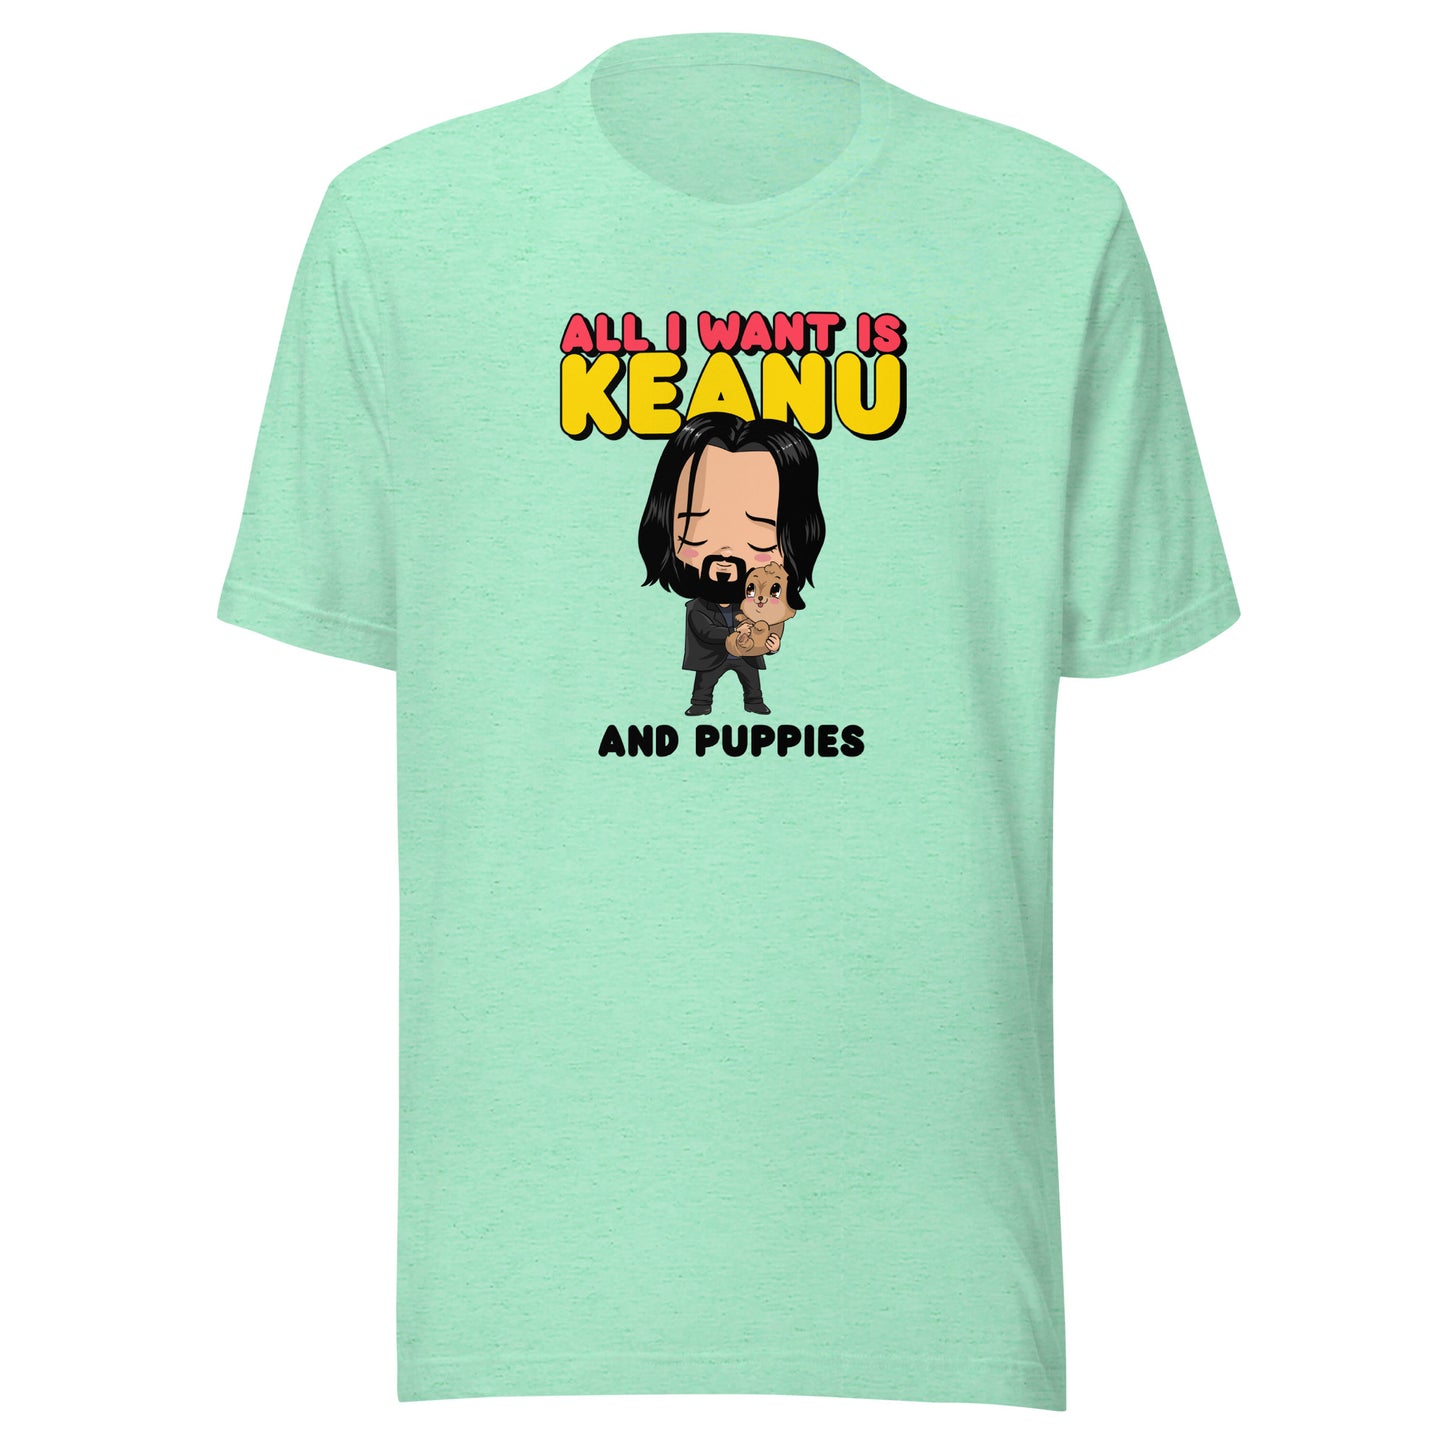 All I Want is Keanu and Puppies Unisex t-shirt